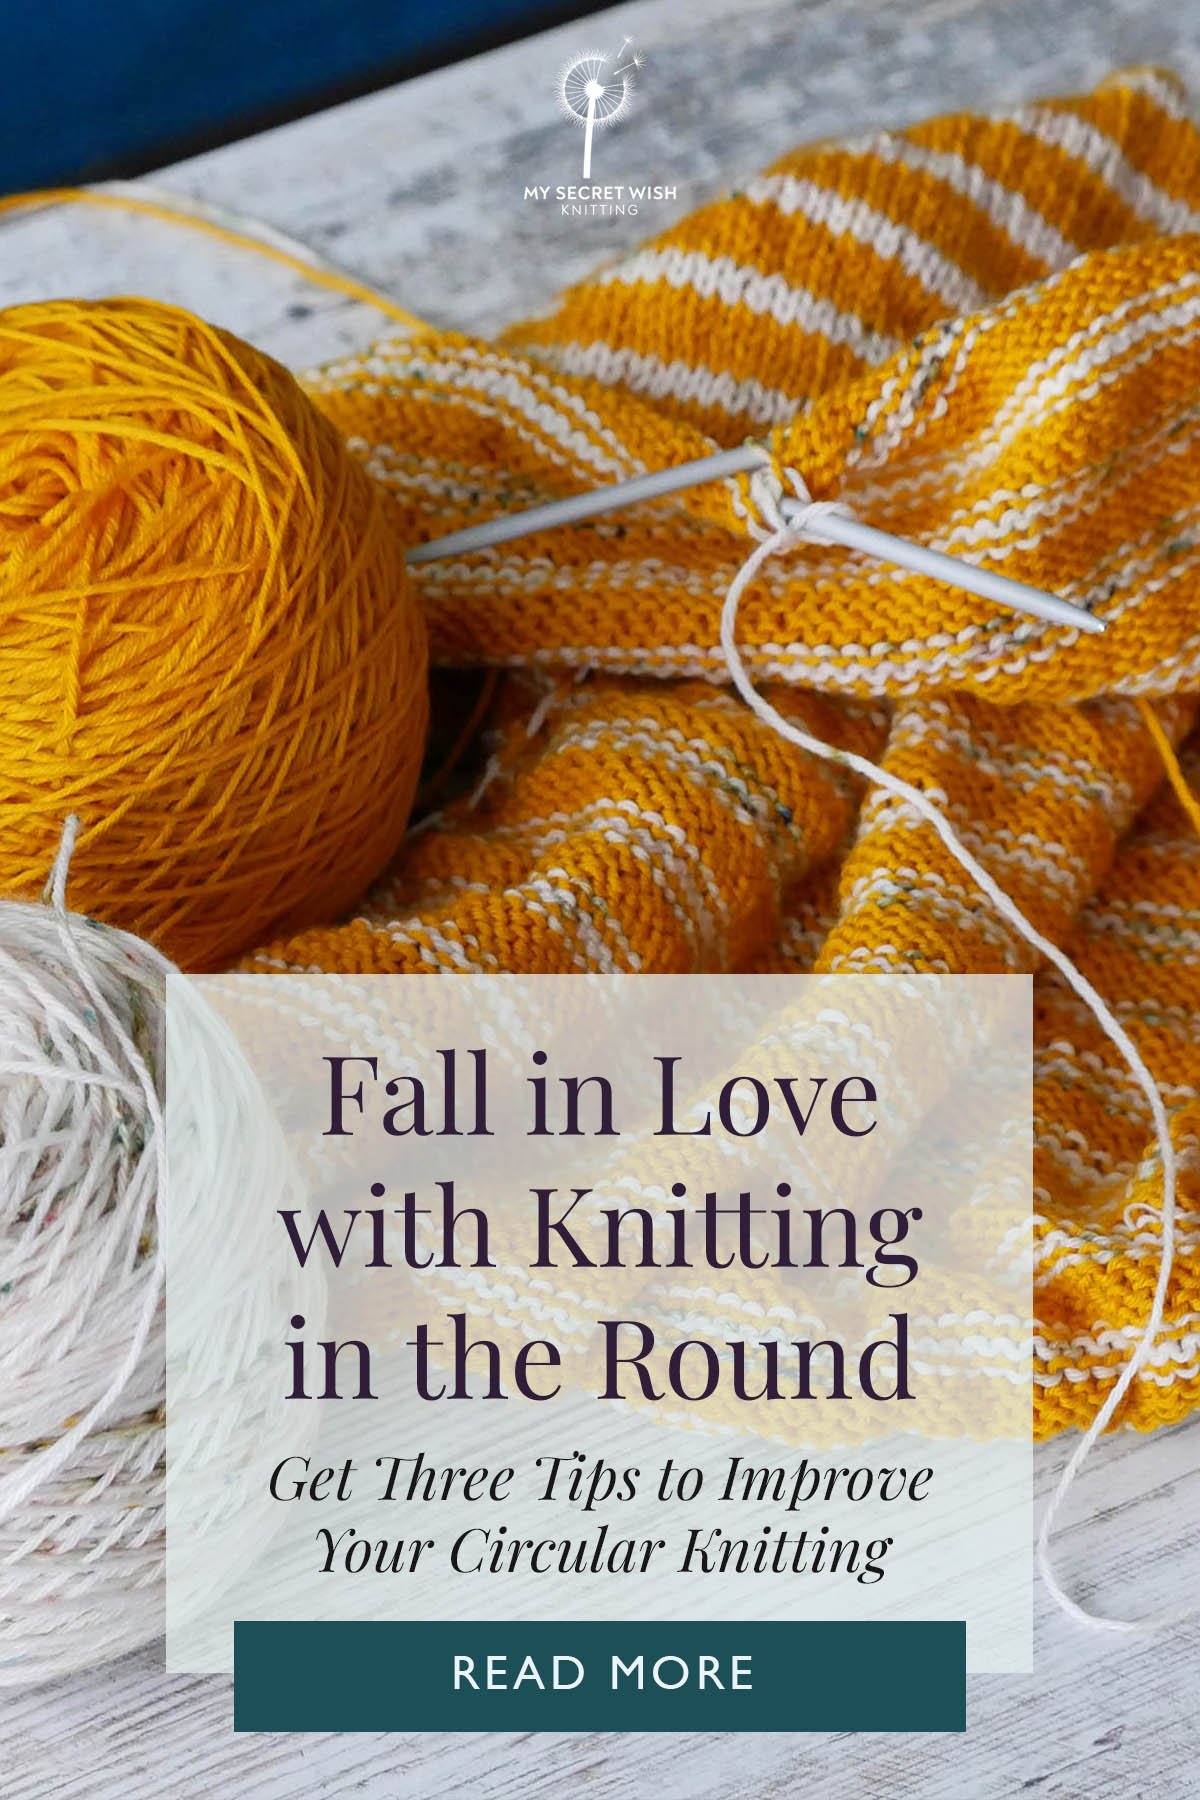 Fall in Love with Knitting in the Round